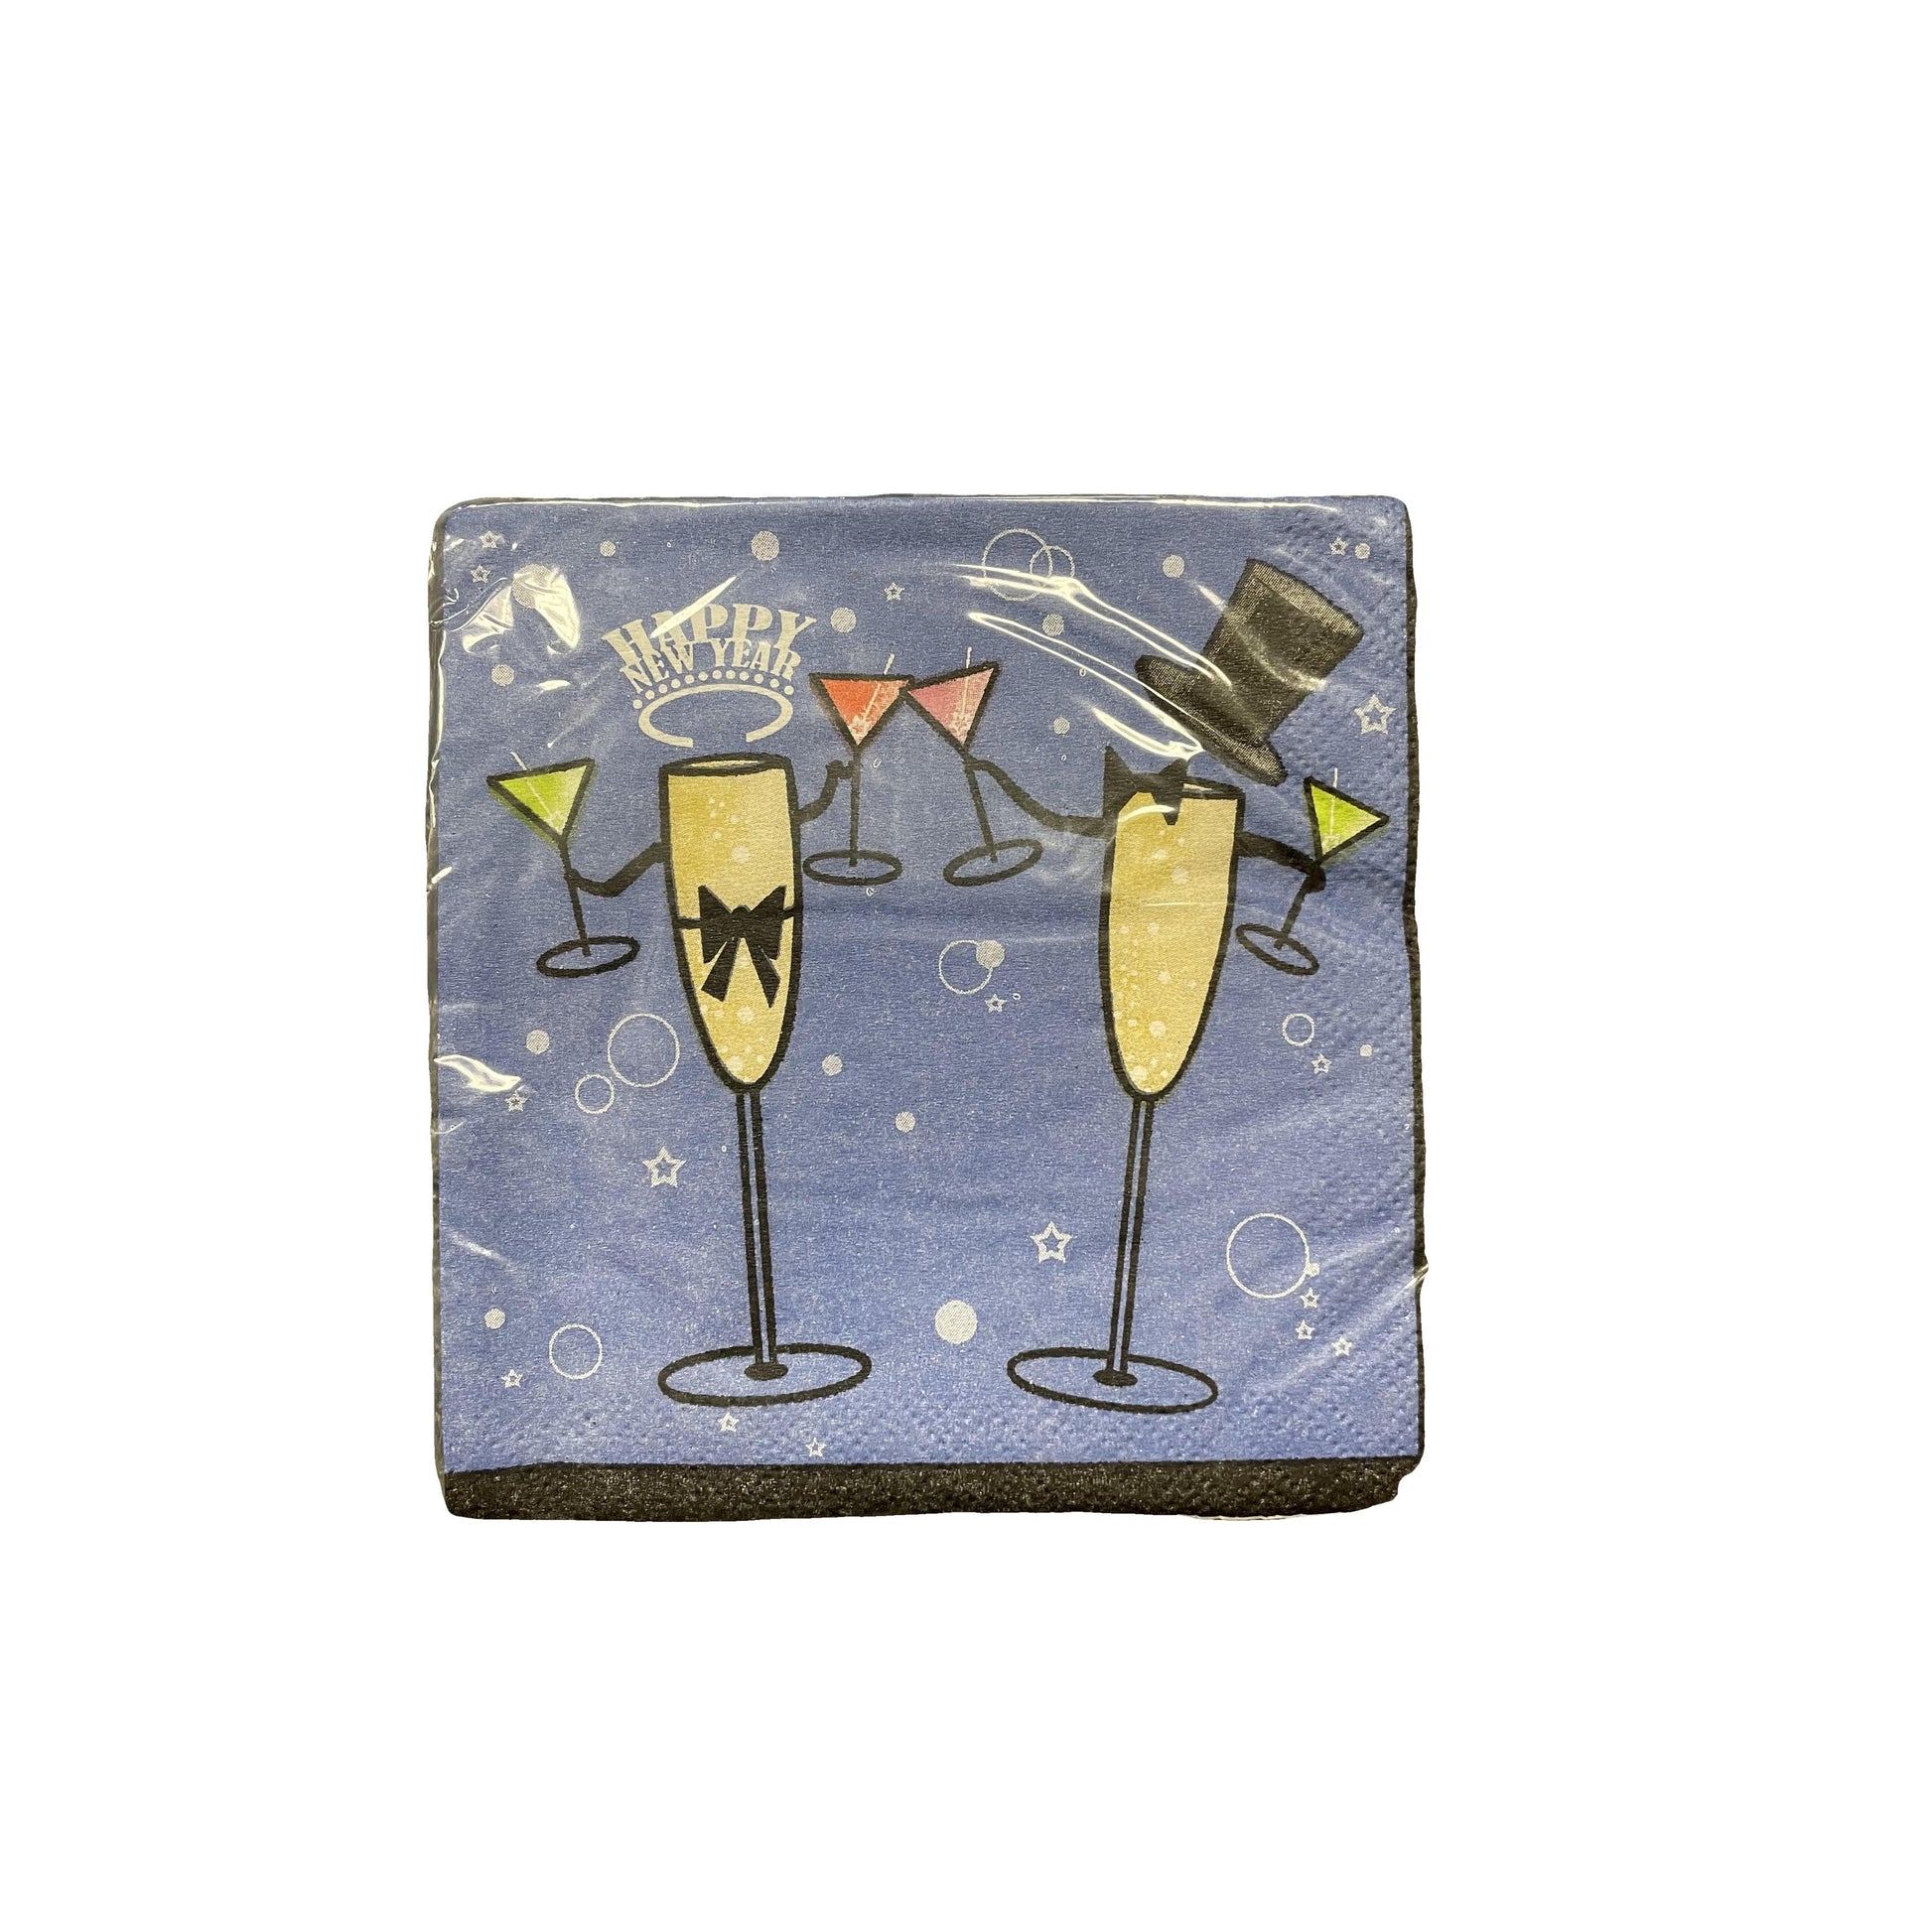 New Year's (Champagne Toast) Cocktail Napkins & Dessert Plates-Your Private Bar